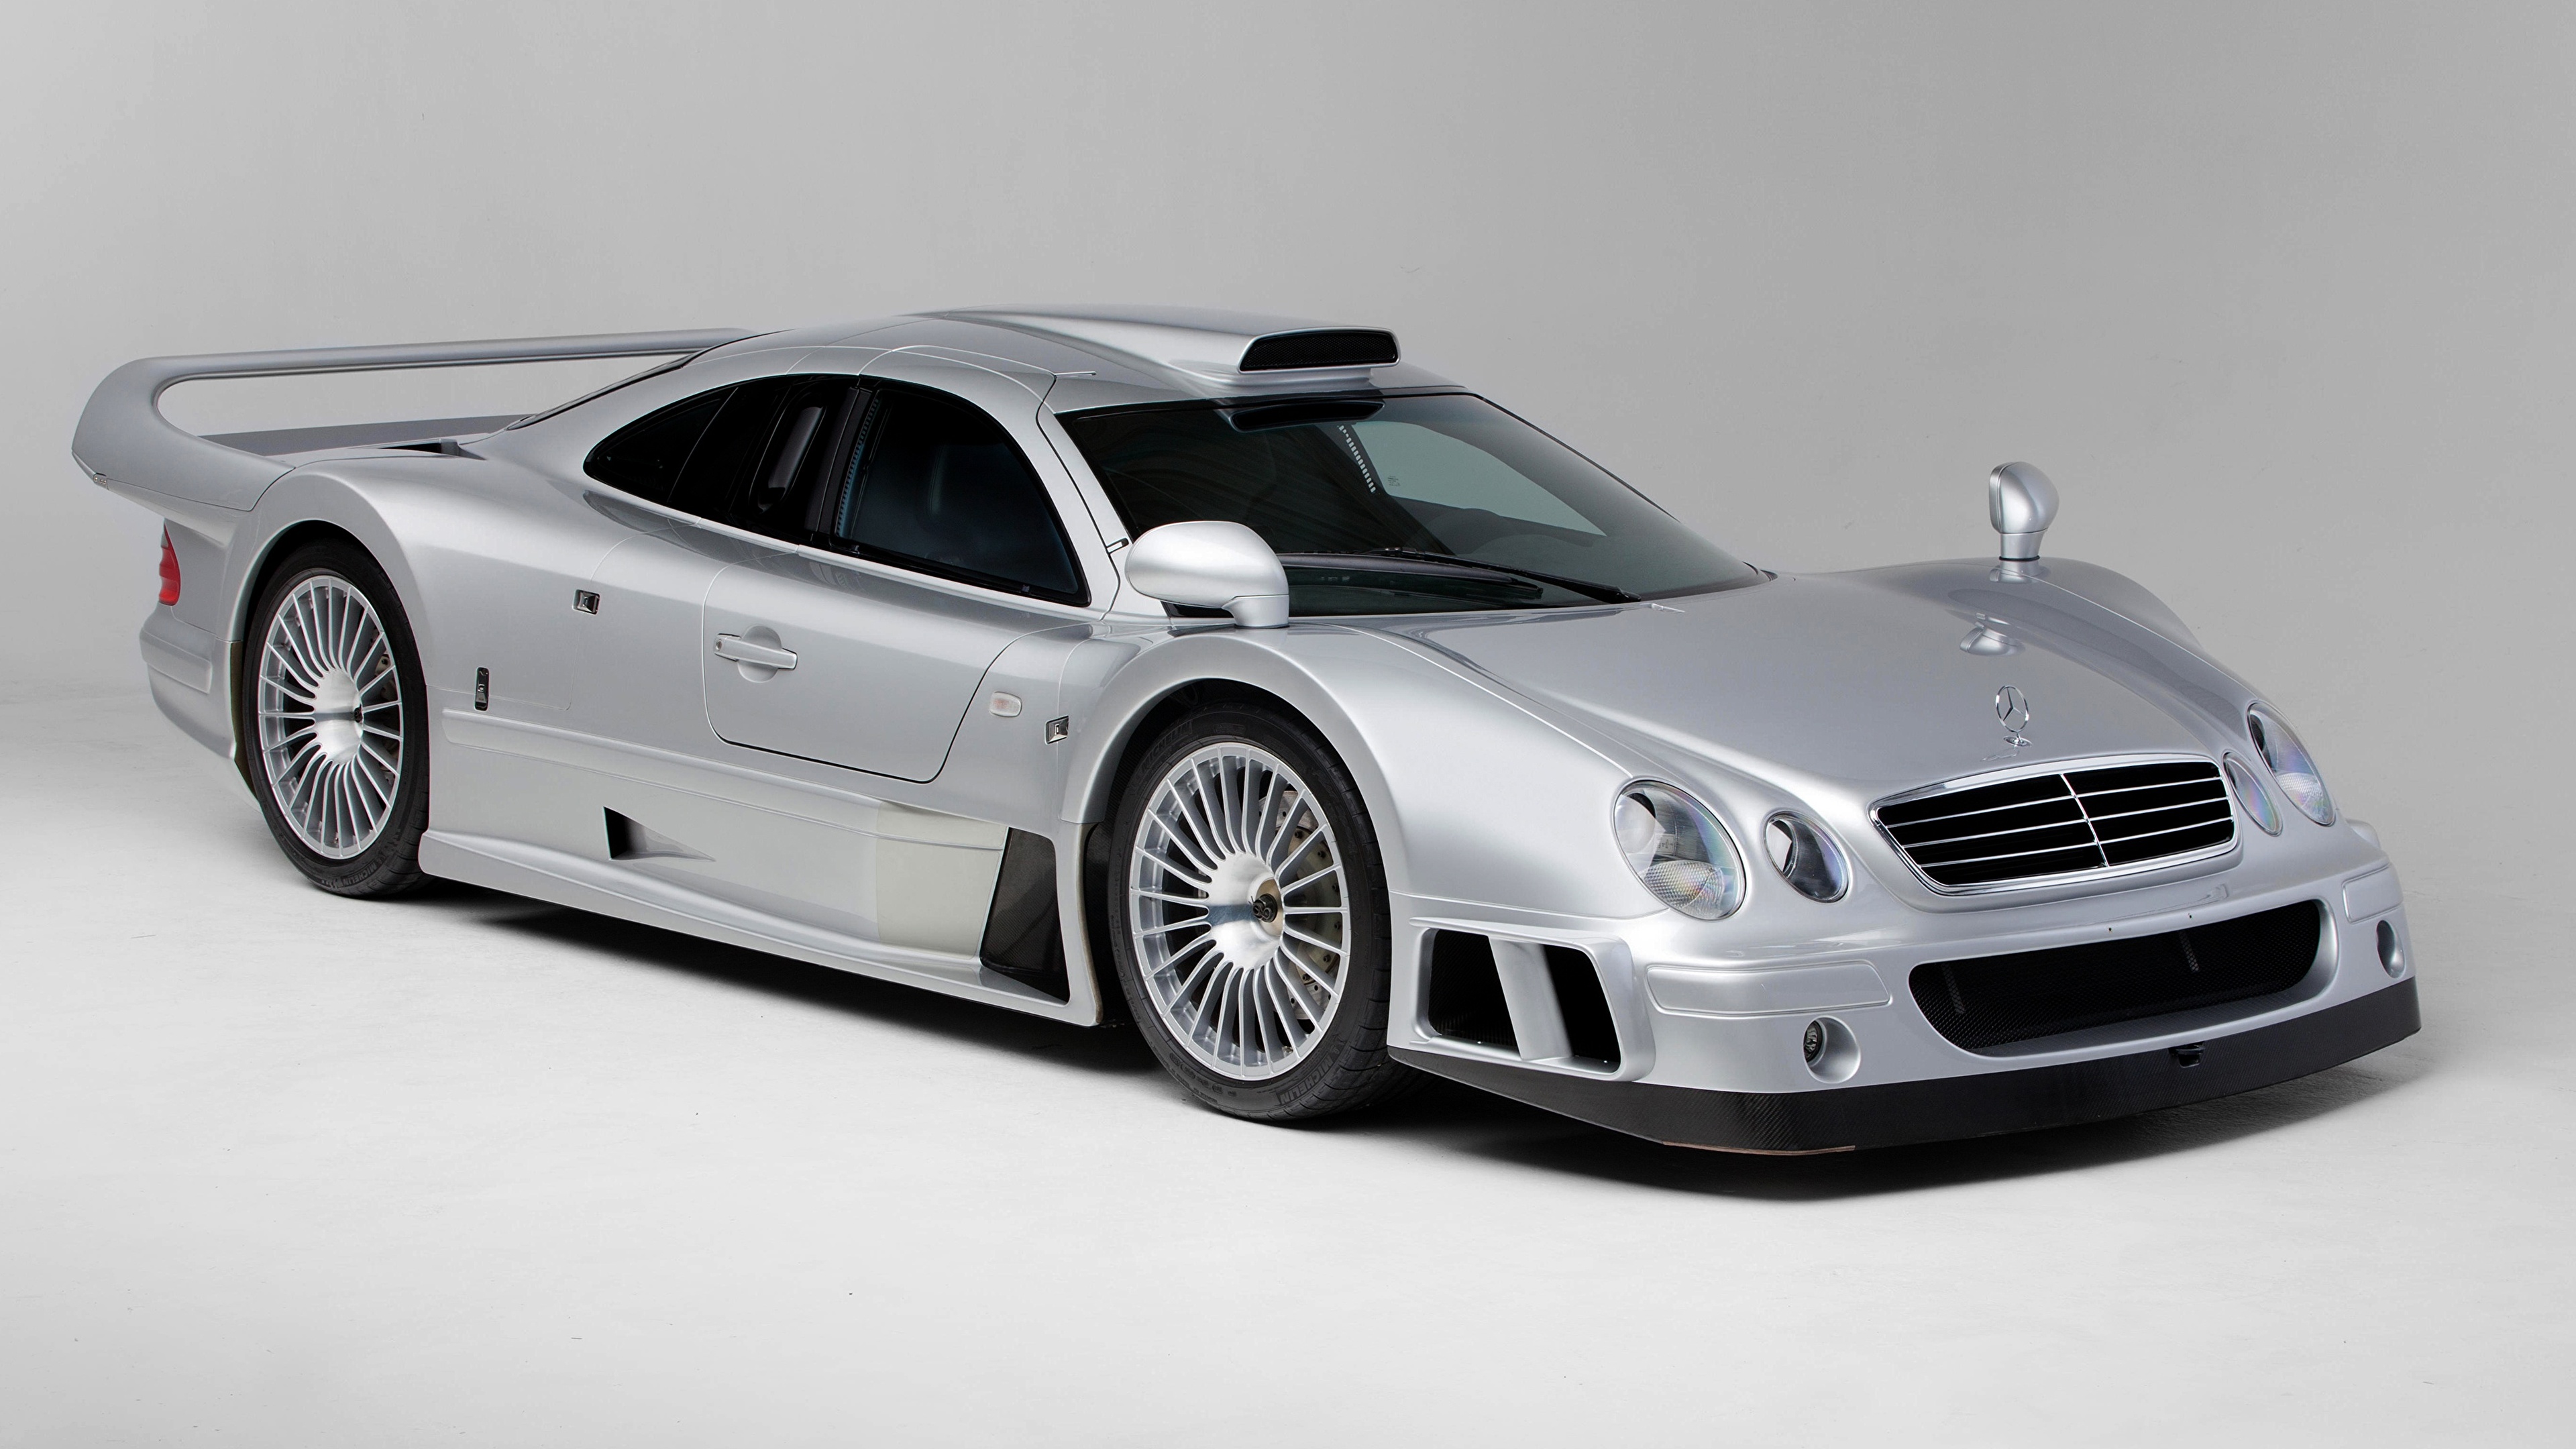 Image Mercedes Benz Clk Gtr Amg Coupe 1997 Coupe Silver 3840x2160